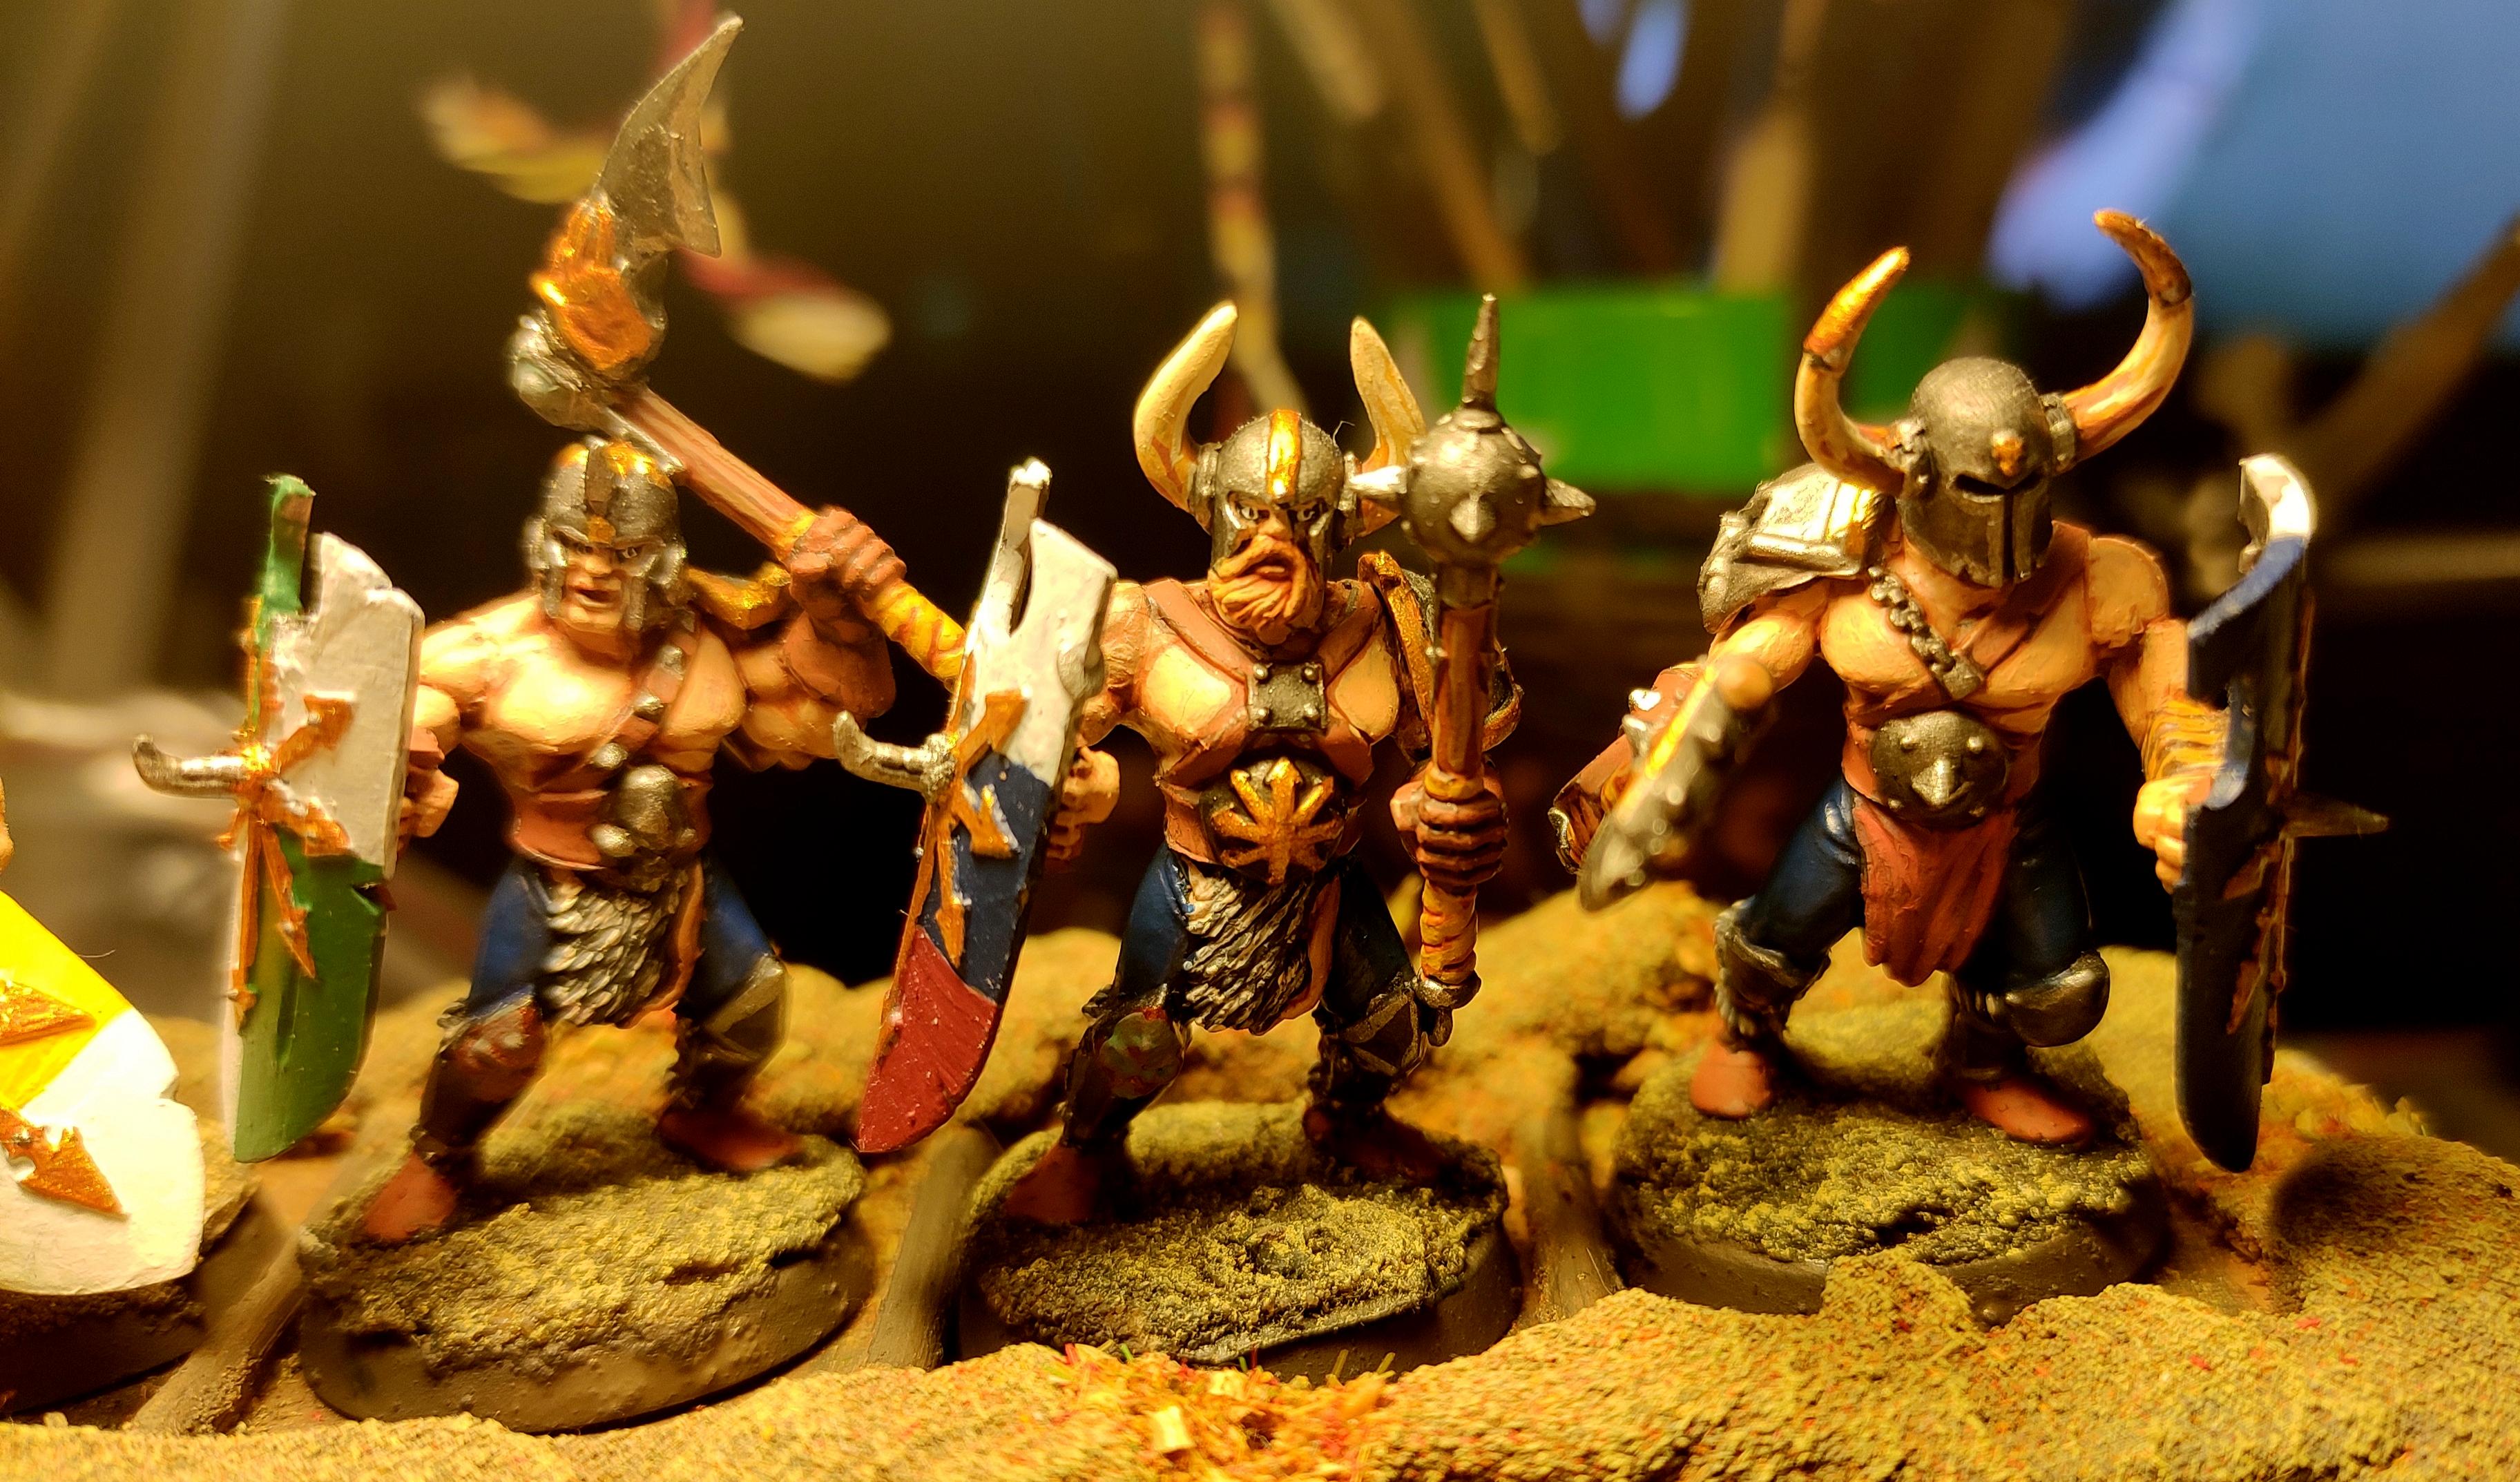 Age Of Sigmar, Axe, Barbarian, Beard, Conversion, Flail, Infantry, Mace, Marauders, Norsca, Regiment, Shield, Slaves To Darkness, Sword, Warband, Warhammer Fantasy, Warriors